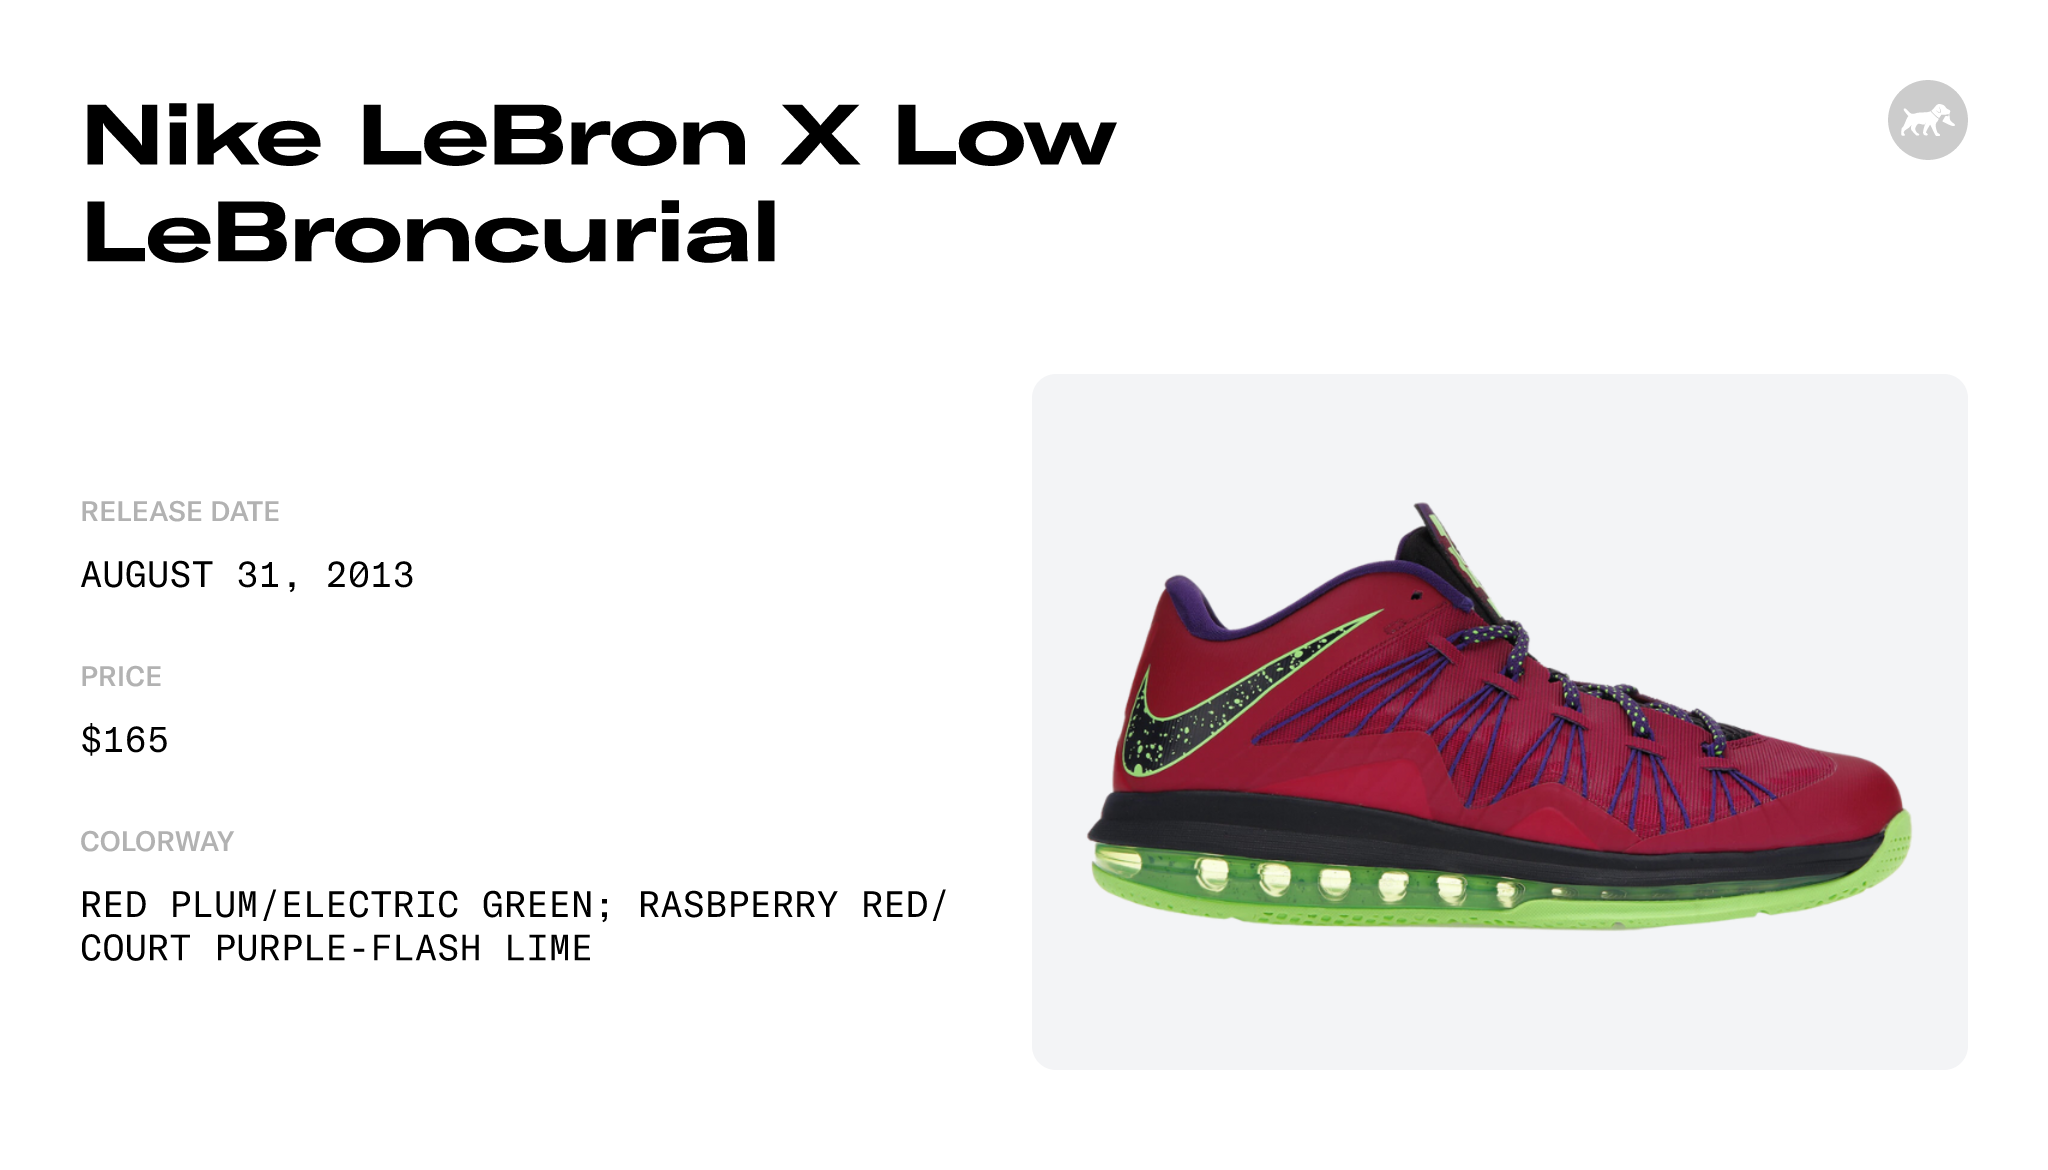 Nike LeBron X Low LeBroncurial - 579765-601 Raffles and Release Date